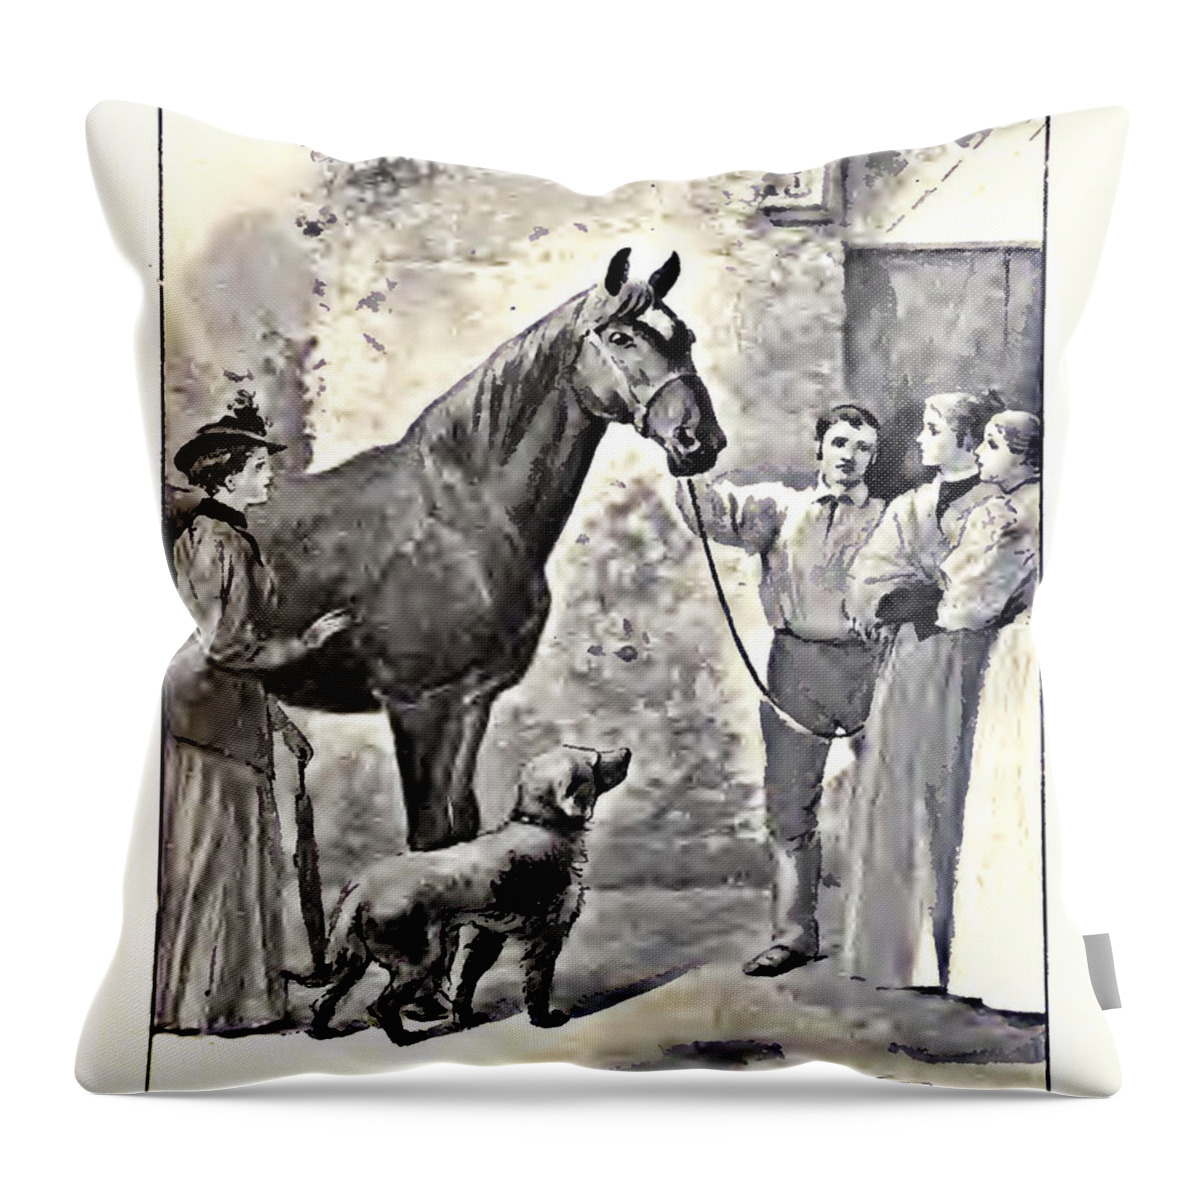 Black Beauty Throw Pillow featuring the digital art New Home - Black Beauty by Janice OConnor